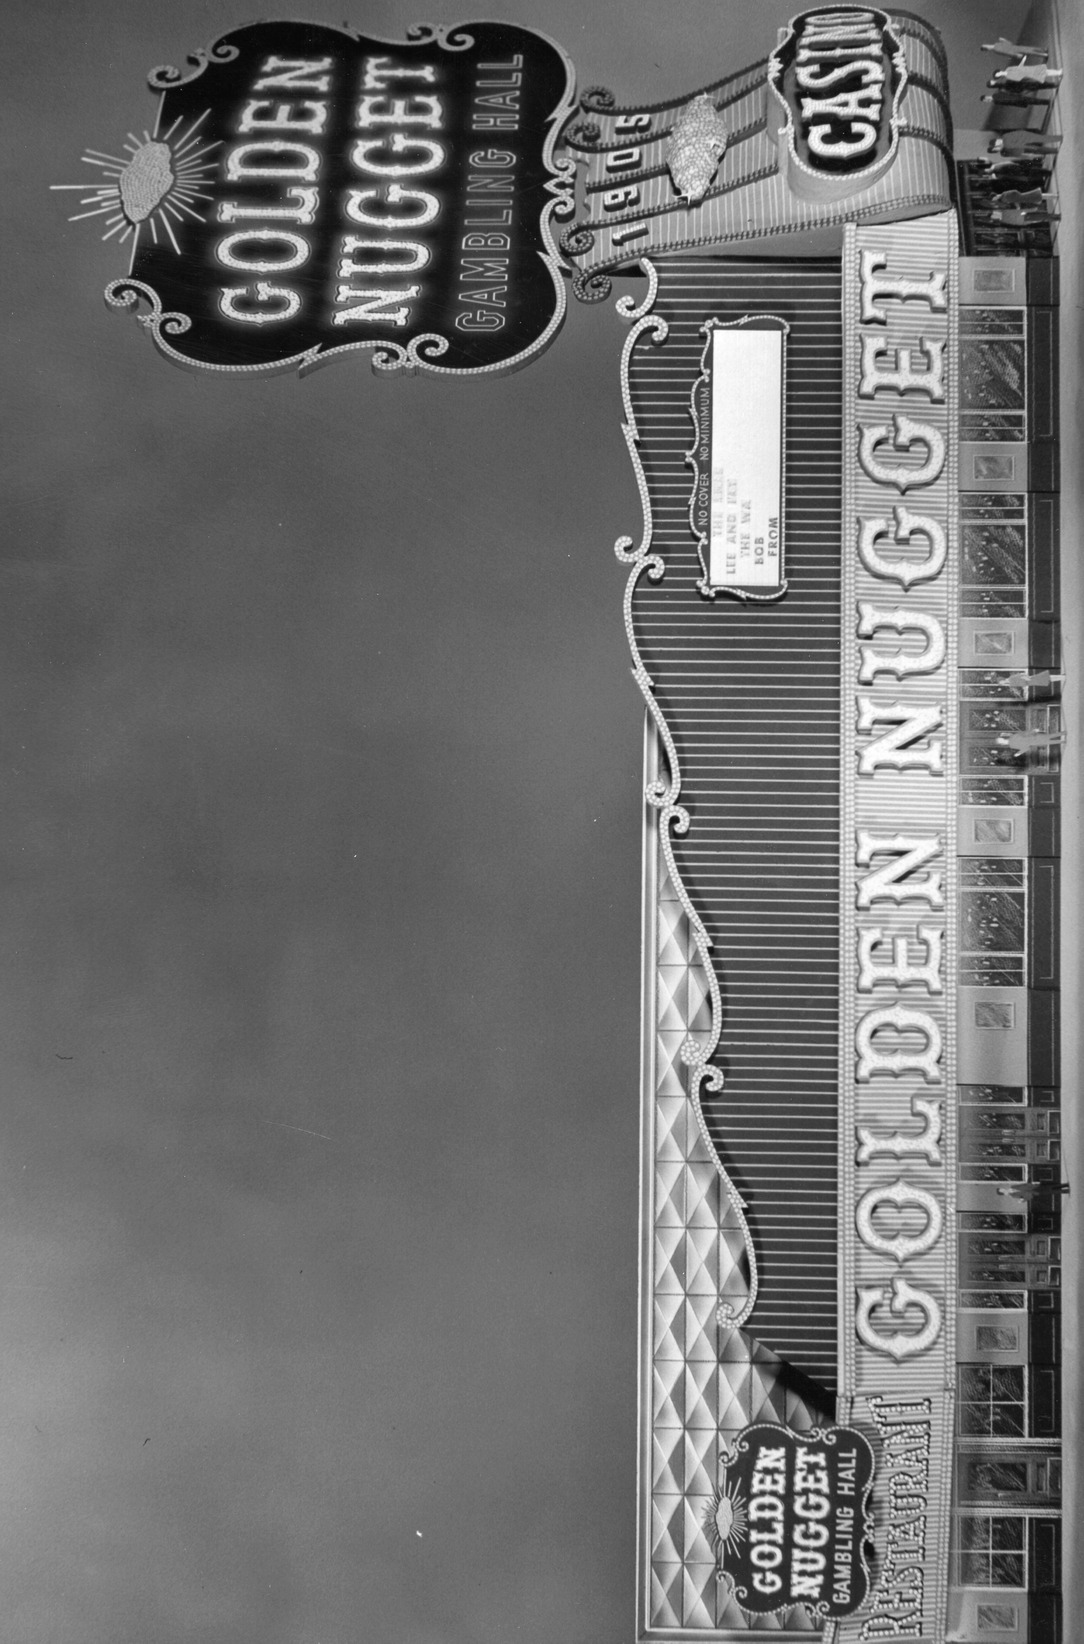 Photograph of a scale model of the Golden Nugget Gambling Hall, Second Street side (Las Vegas), 1958